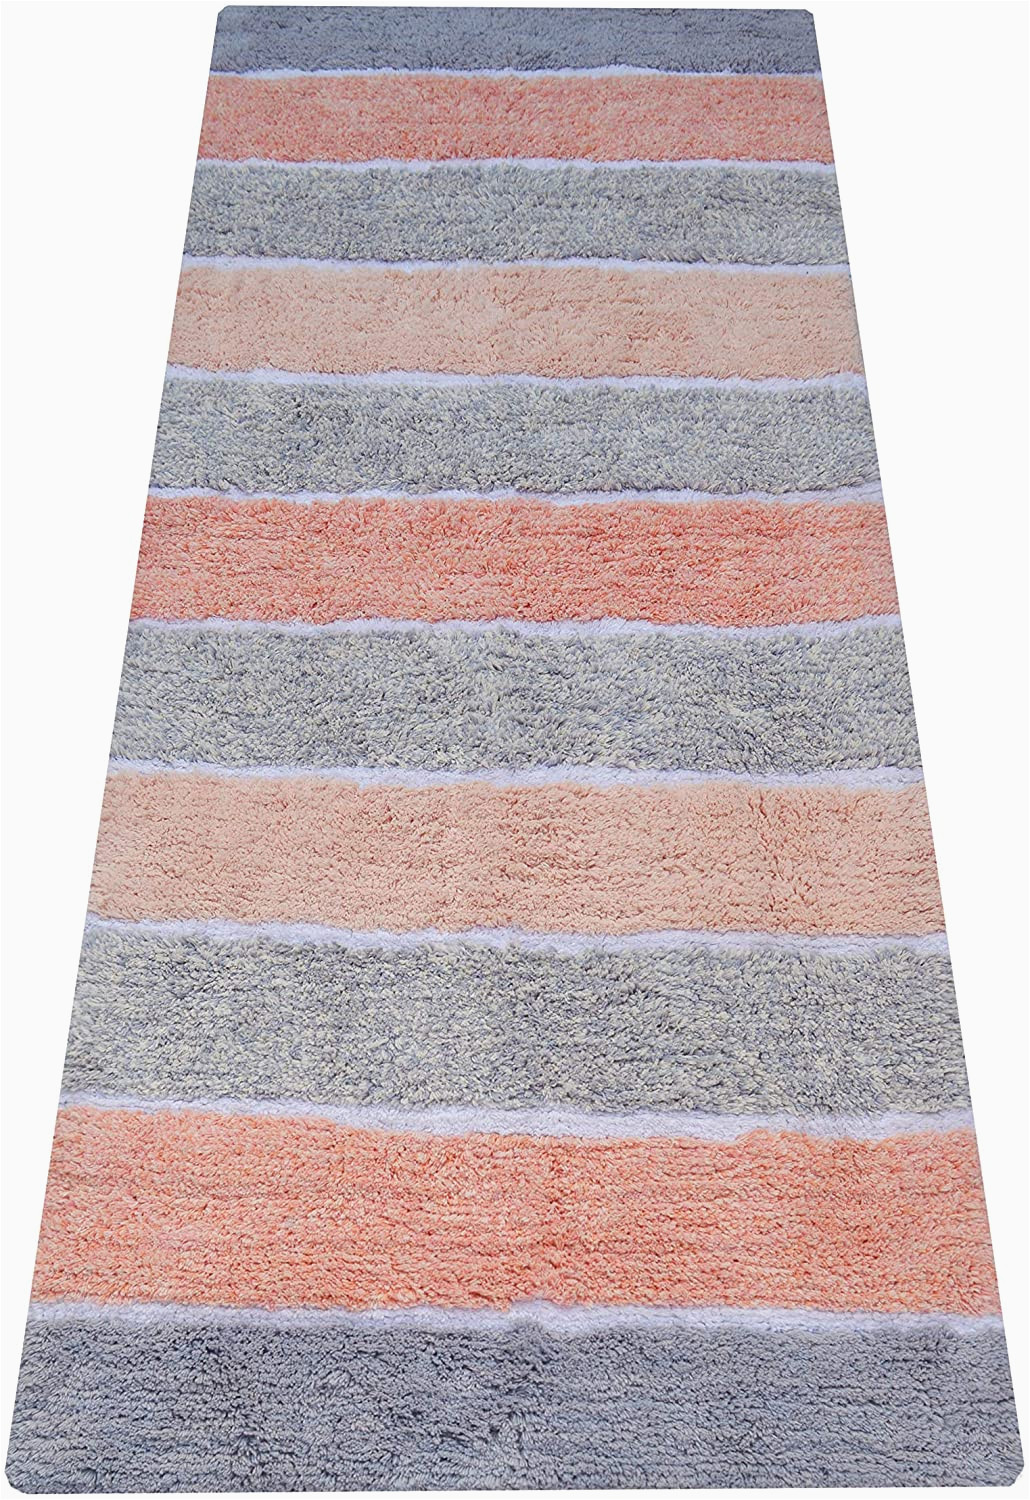 Bath Rug Non Skid Backing Chardin Home Cordural Stripe Bath Runner Non Skid Backing 24 W X 60 L Lavender Gray and Coral Pink